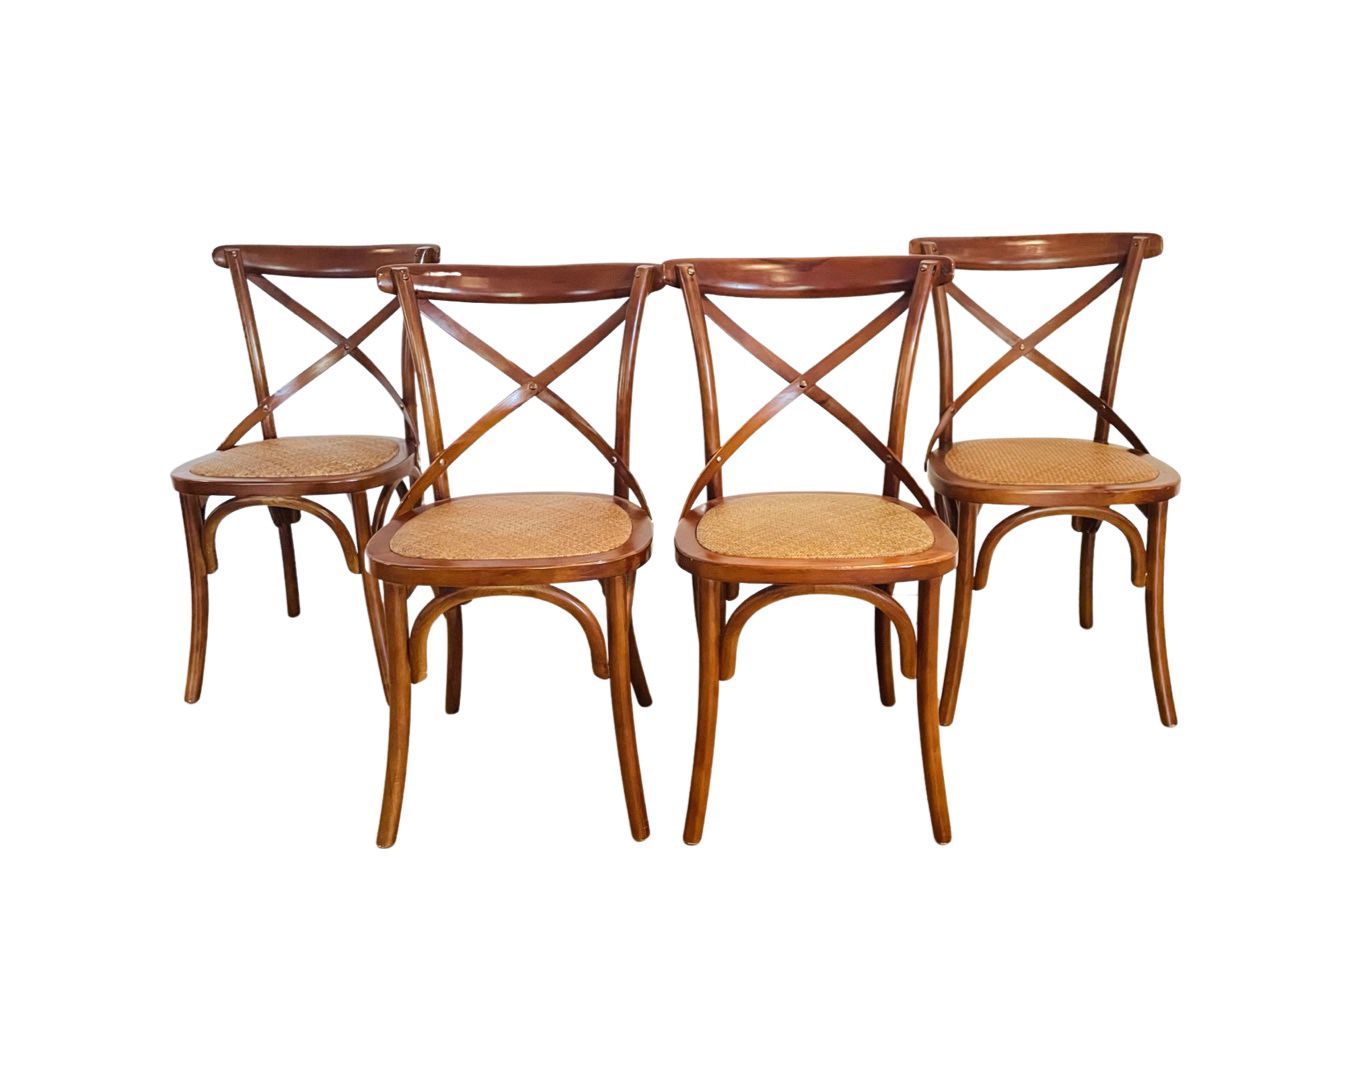 4 tonet ratten vintage bentwood cane dining room chairs accent chairs mid Century-modern